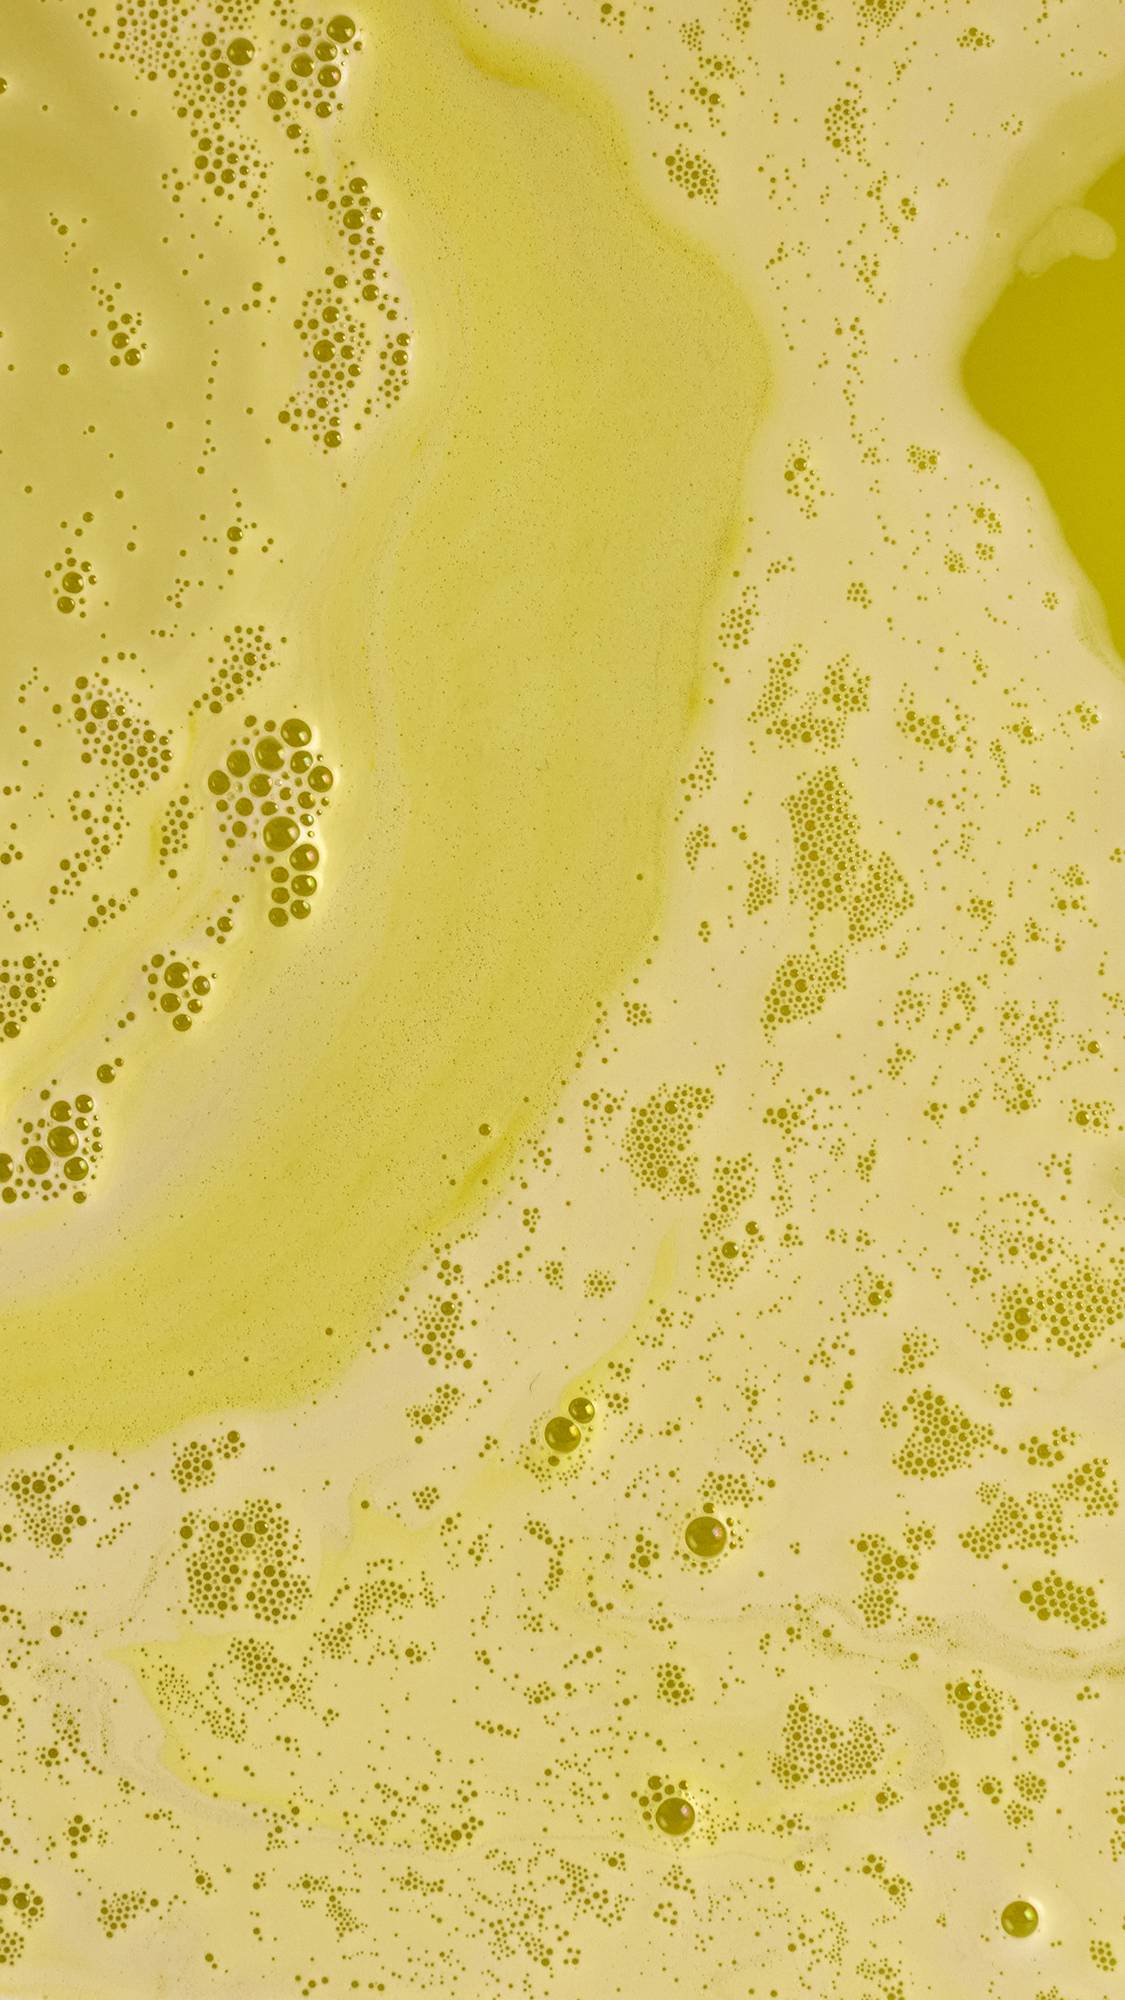 The Blooming Beautiful Marigold bath bomb has dissolved leaving bright yellow, foamy water. 